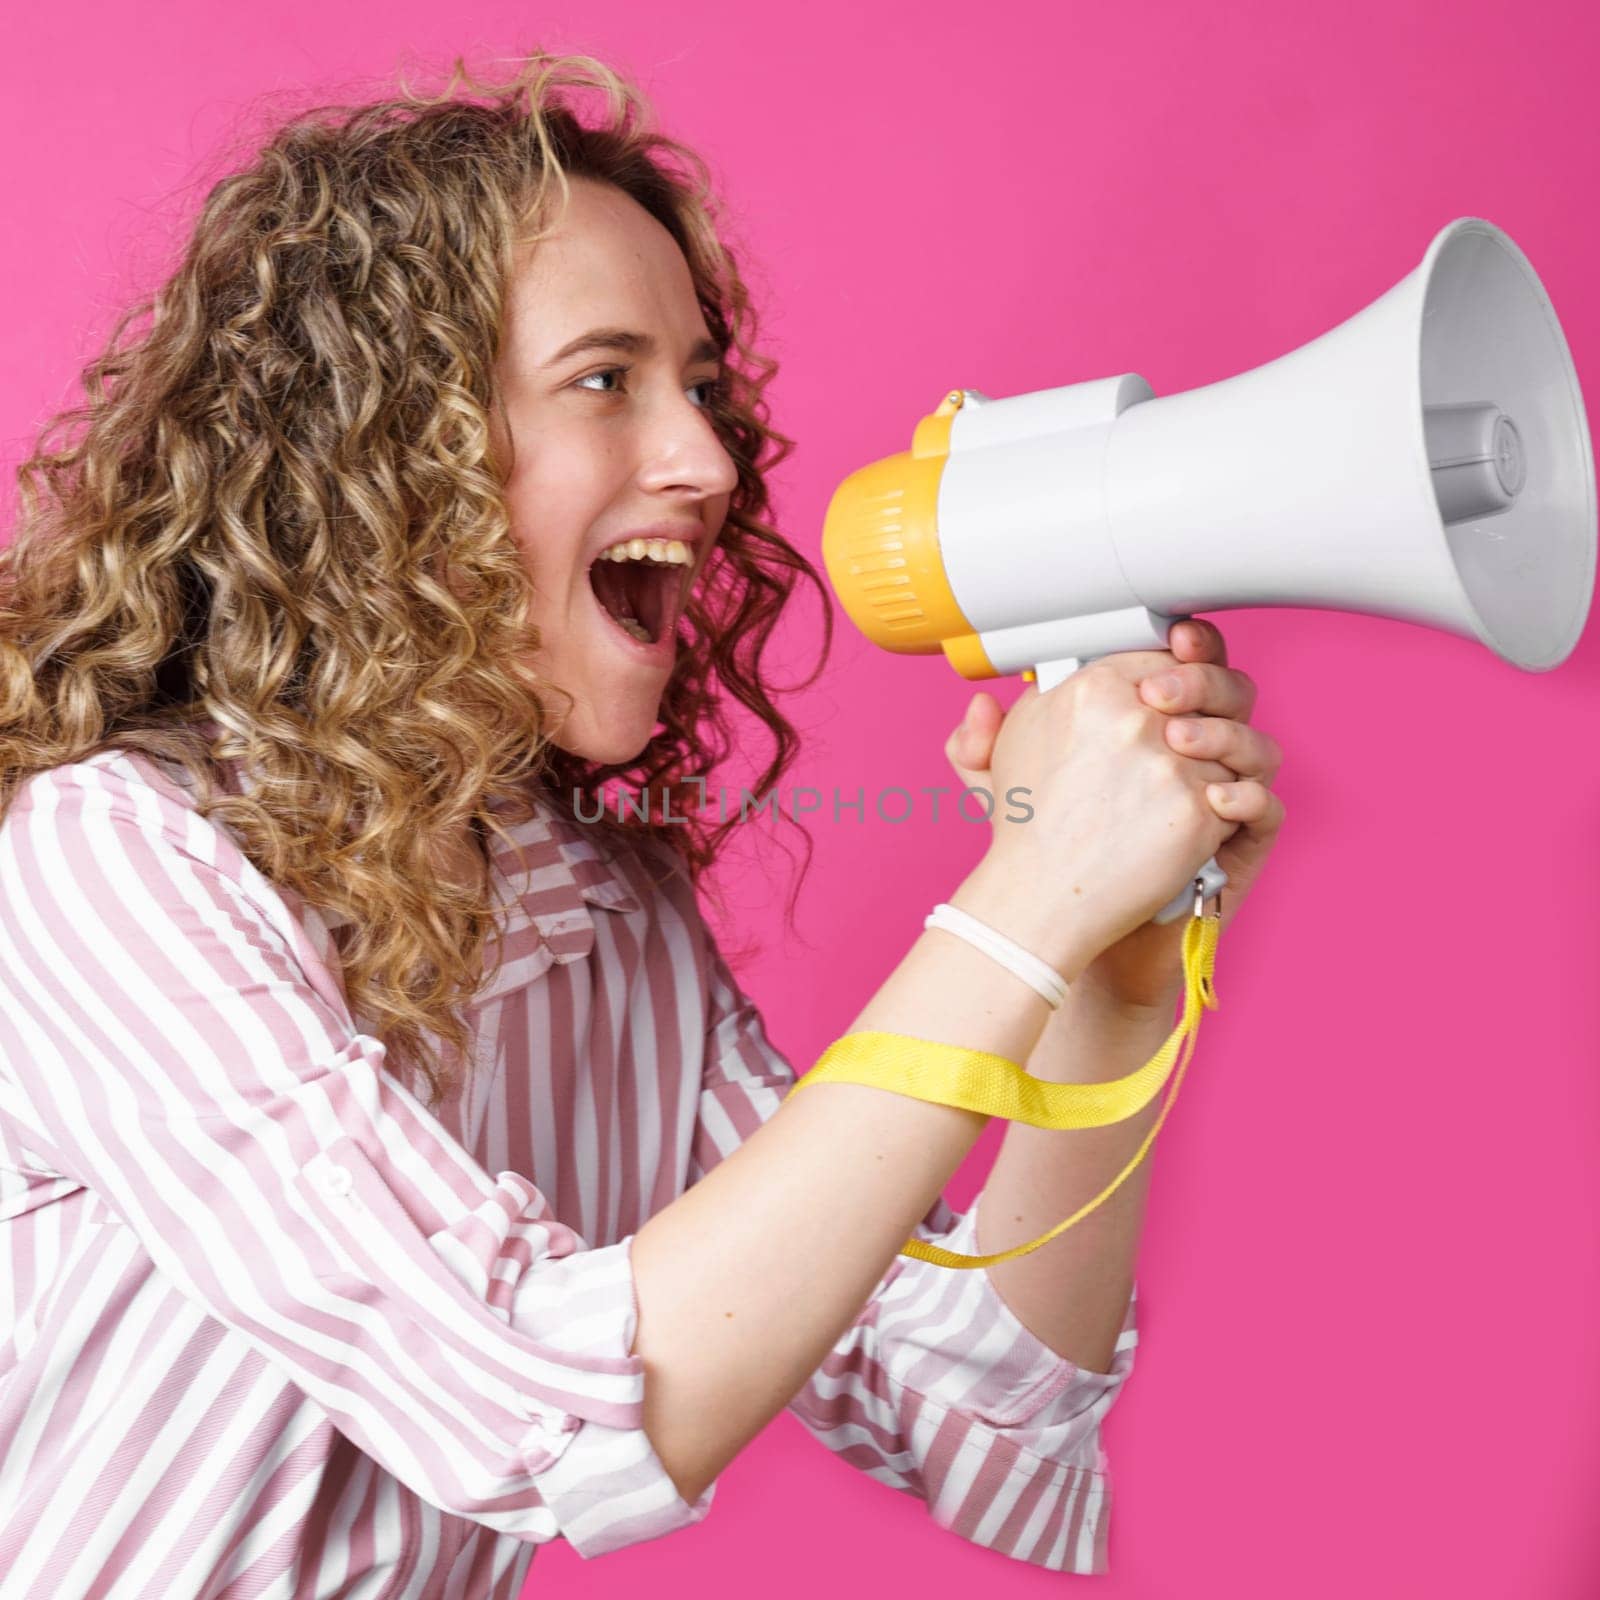 Young woman shouts into a megaphone. Isolated pink background. People sincere emotions lifestyle concept.